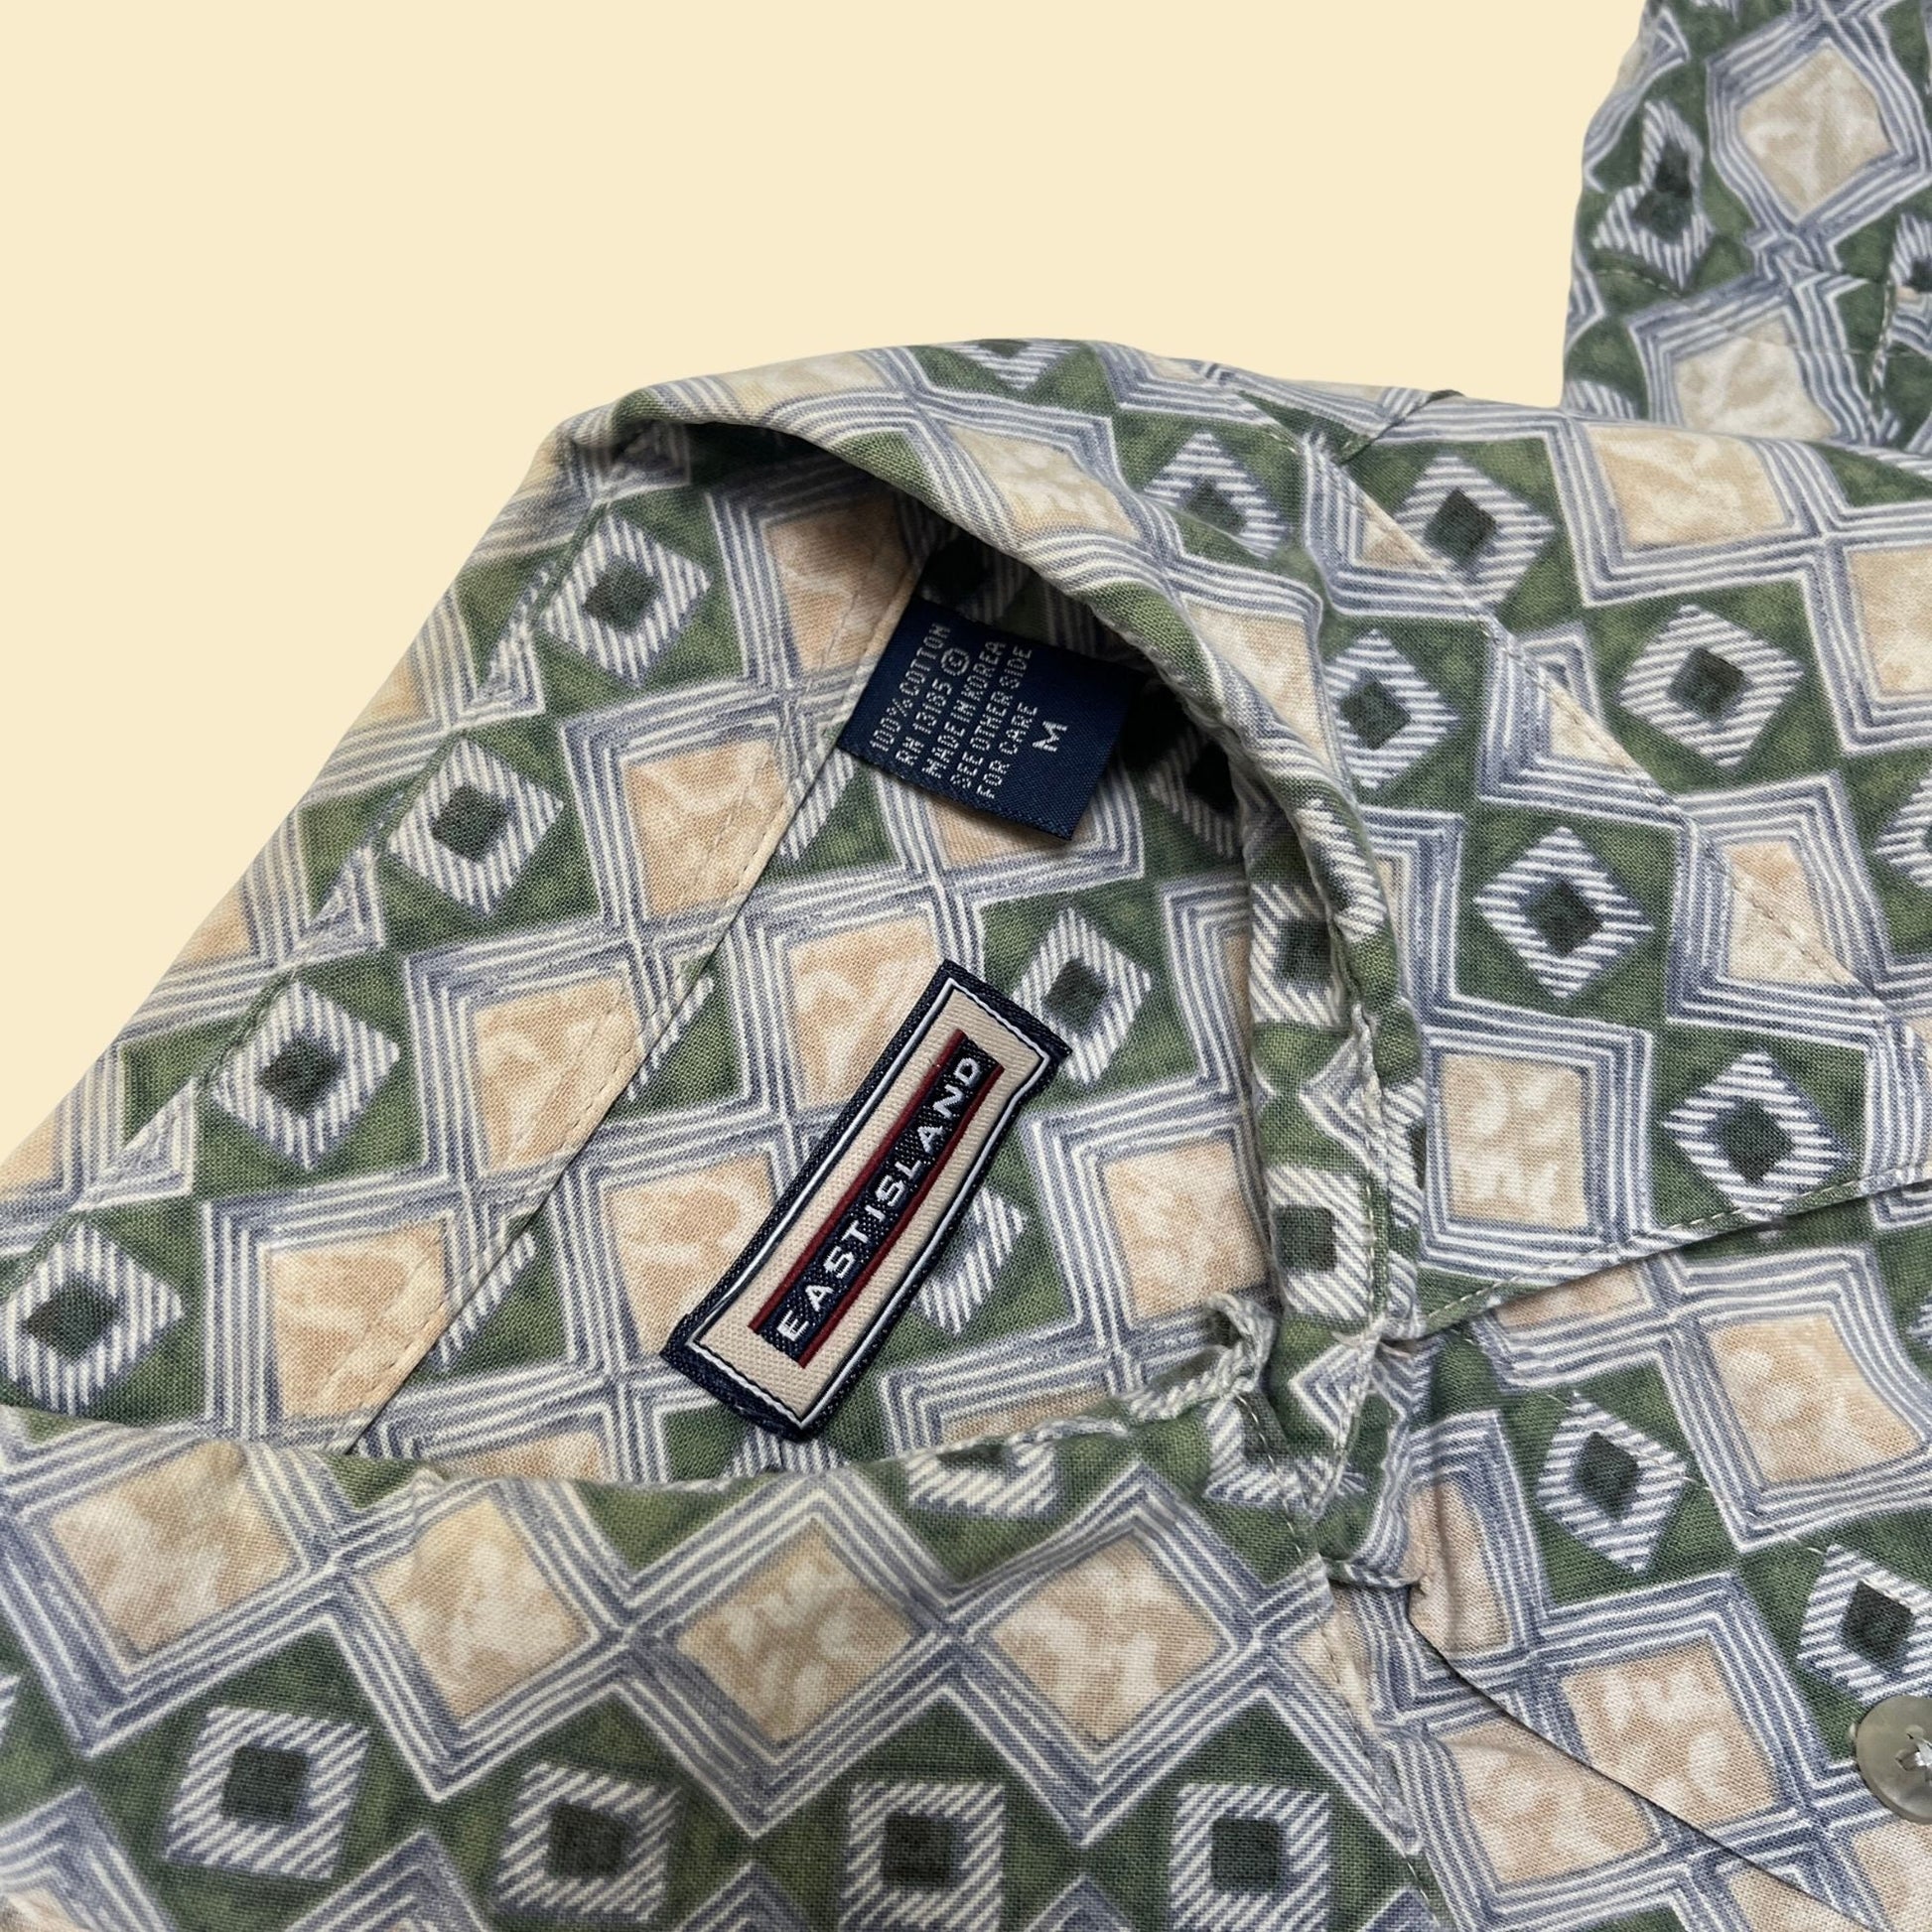 90s geometric shirt by Eastiland, men's short sleeve medium button down with geometric diamond/box pattern, blue green and beige casual top